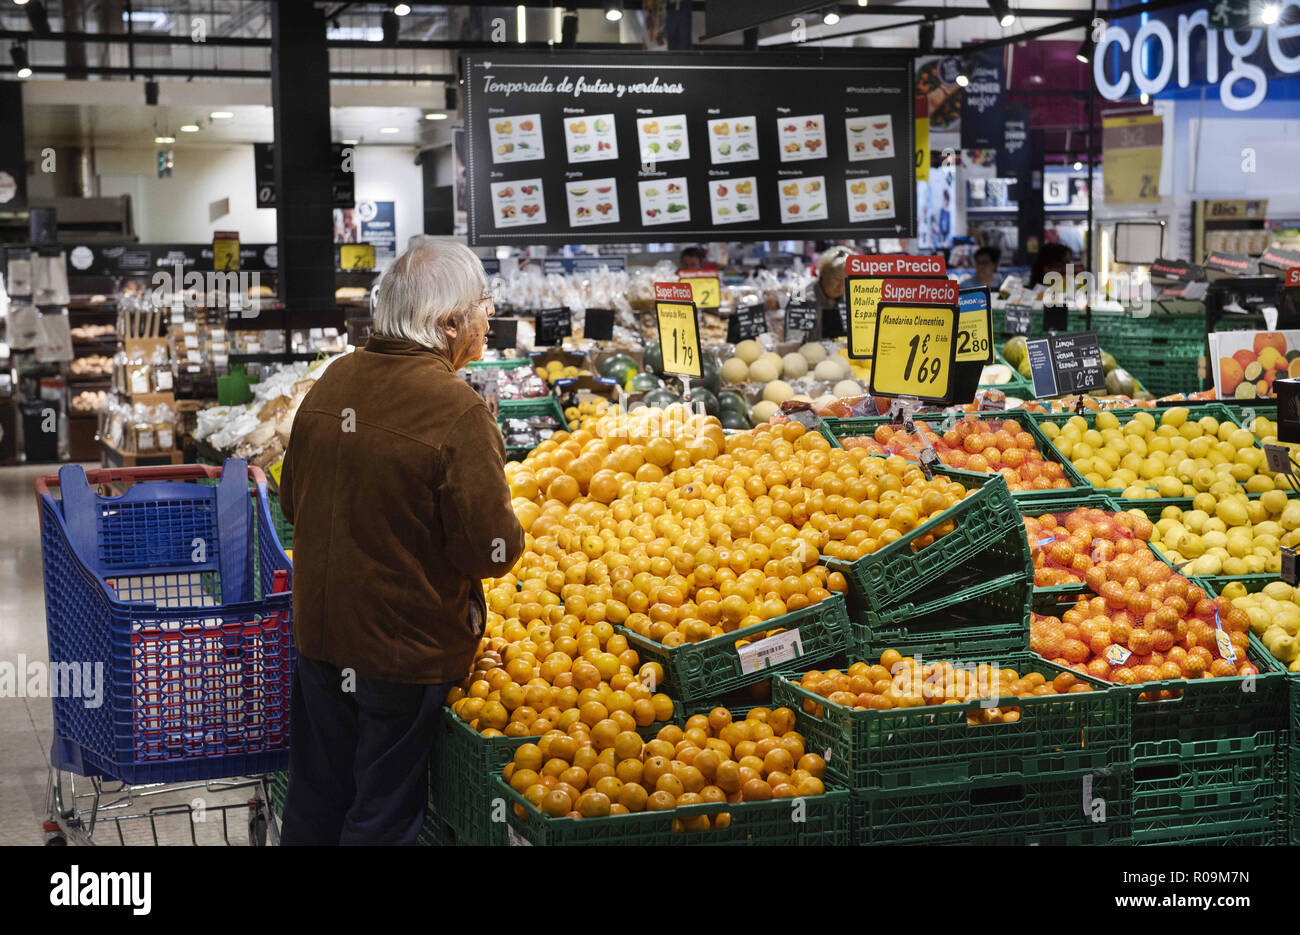 Page 3 - Carrefour In Spain High Resolution Stock Photography and Images -  Alamy